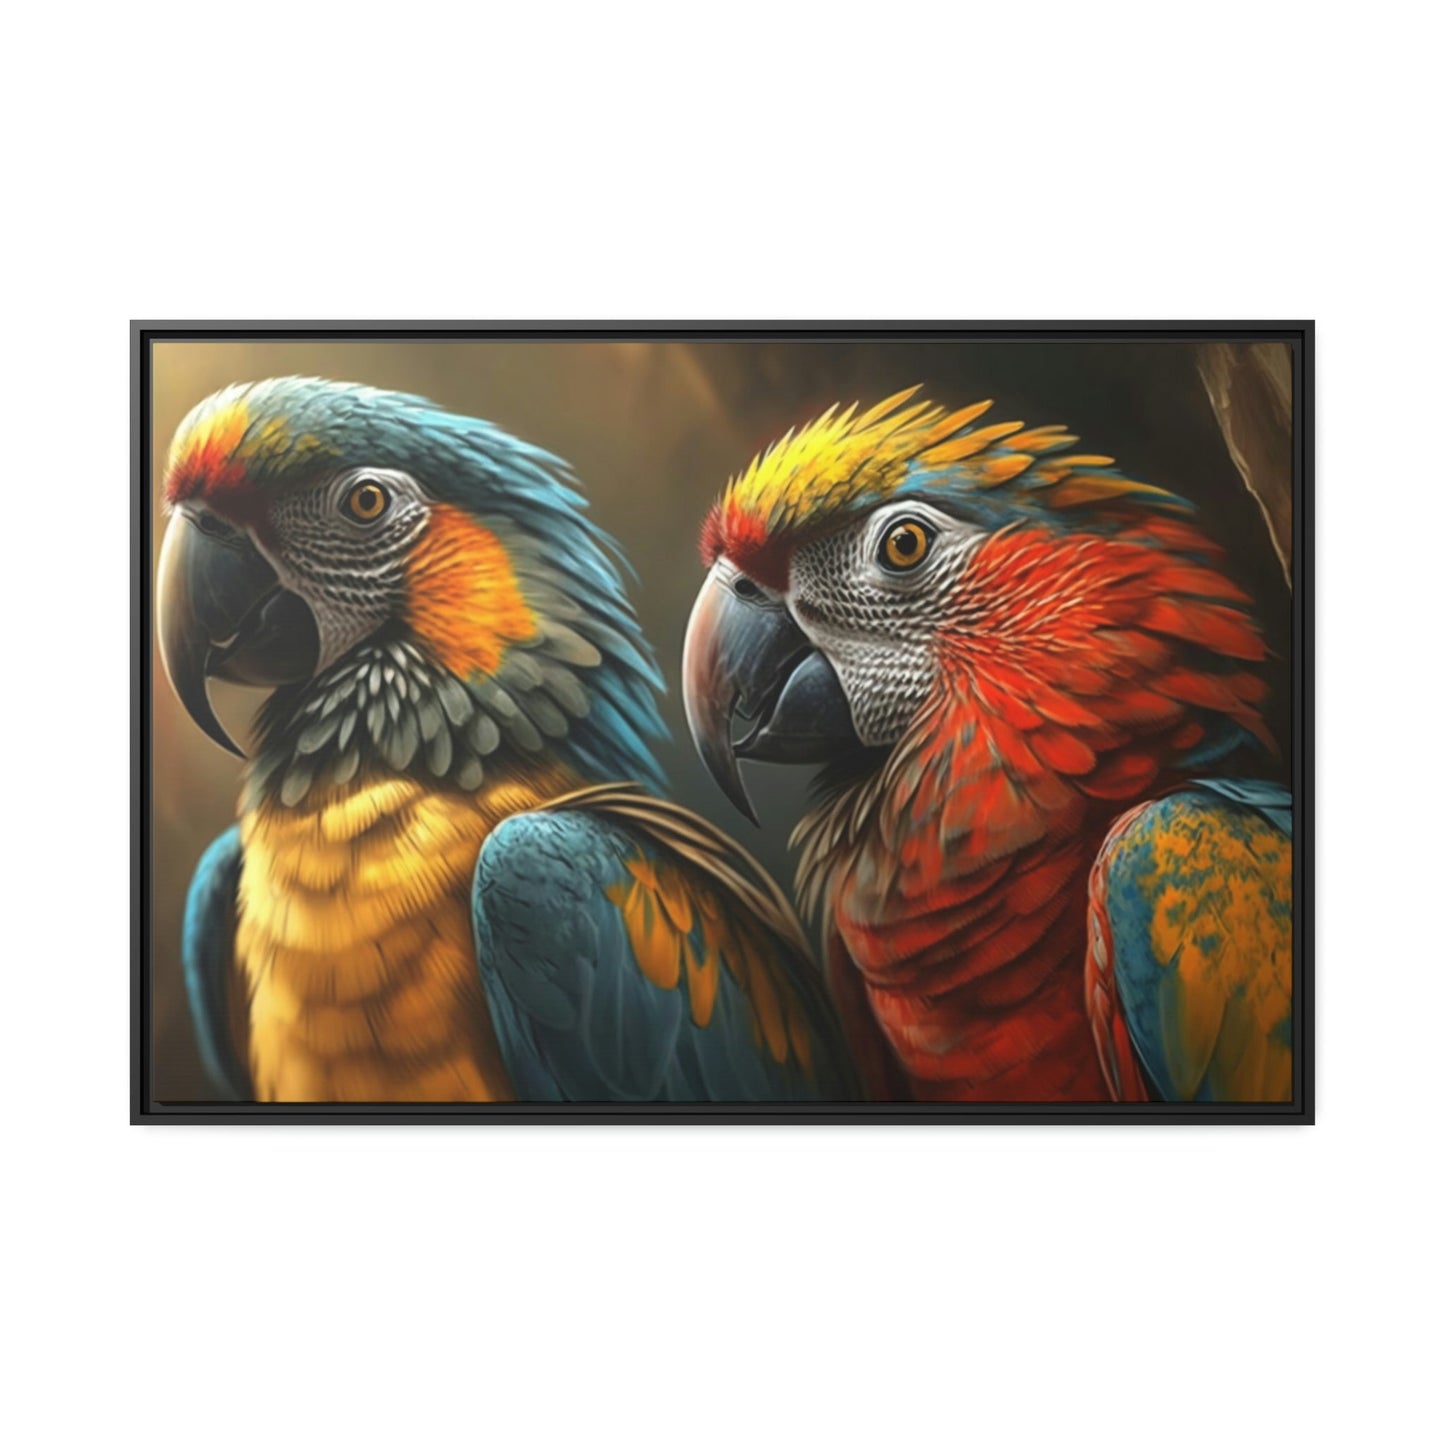 Parrot Serenade: A Canvas of Music and Nature's Harmony